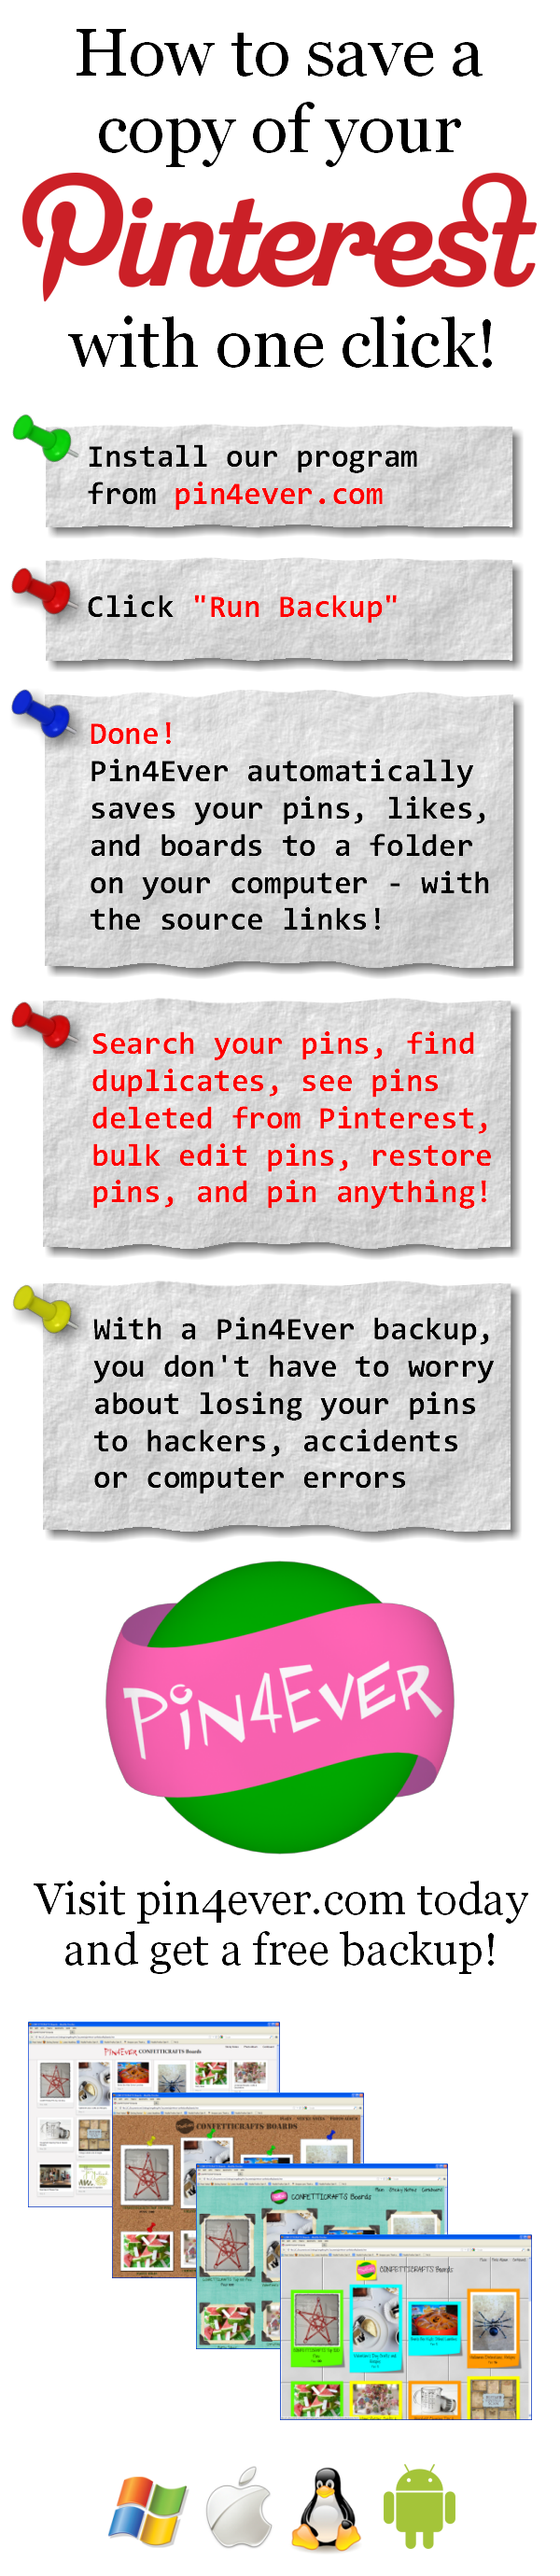 Are your pins protected? Pin4Ever has saved, edited or uploaded 476,666,409 pins since September 2012. Go to pin4ever.com and try it free!